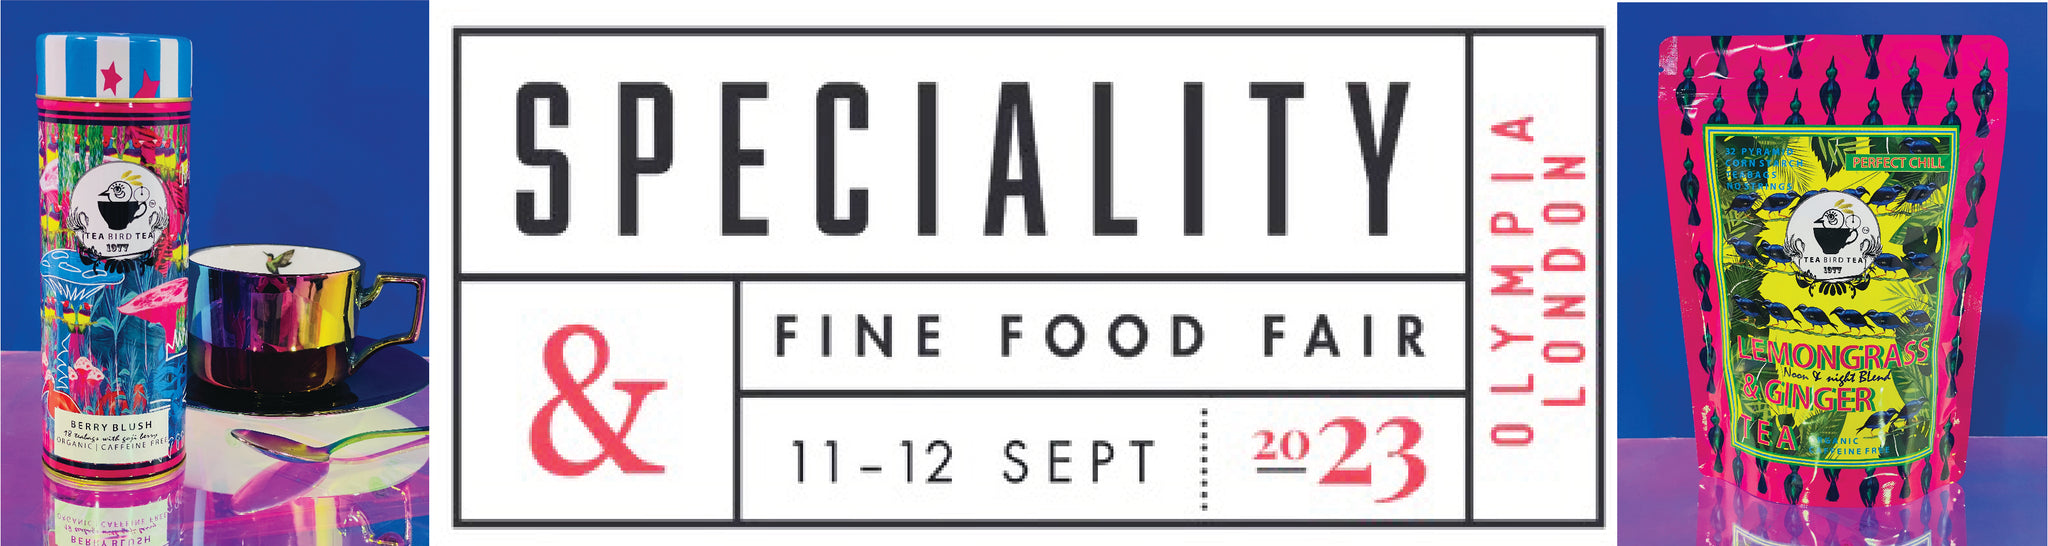 Speciality Fine Food Fair 11th -12th September 2023